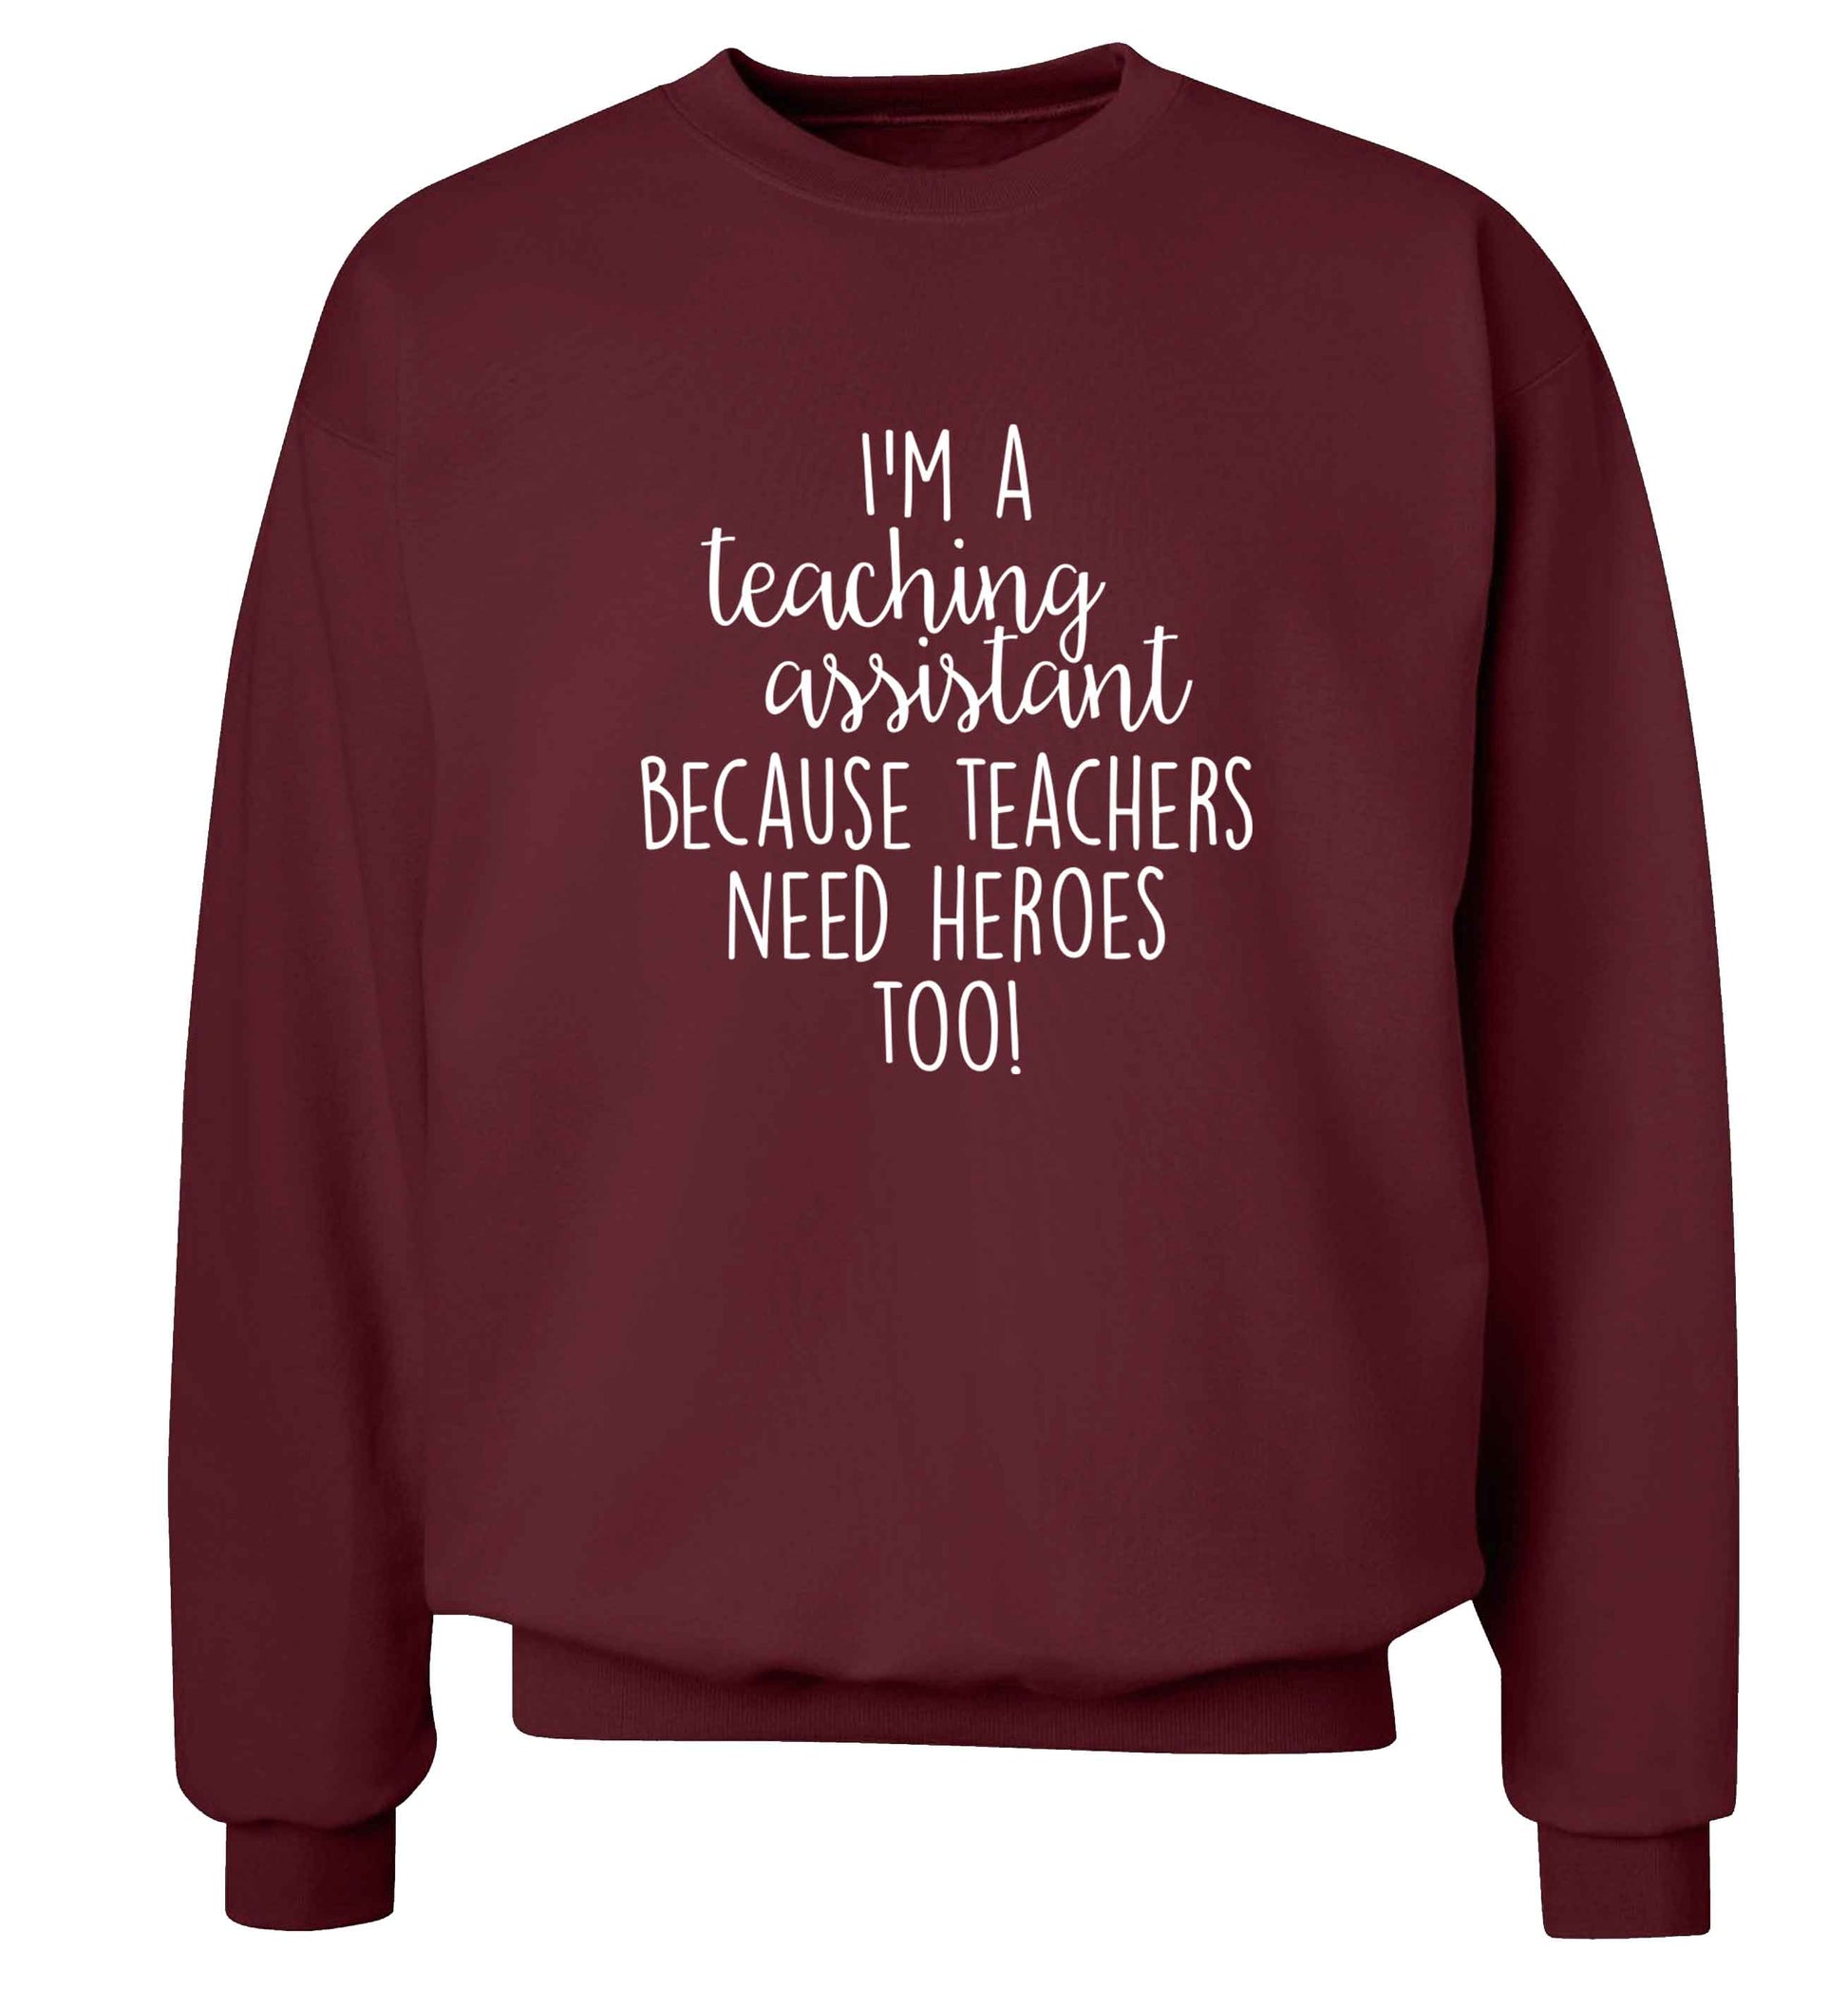 I'm a teaching assistant because teachers need heroes too! adult's unisex maroon sweater 2XL